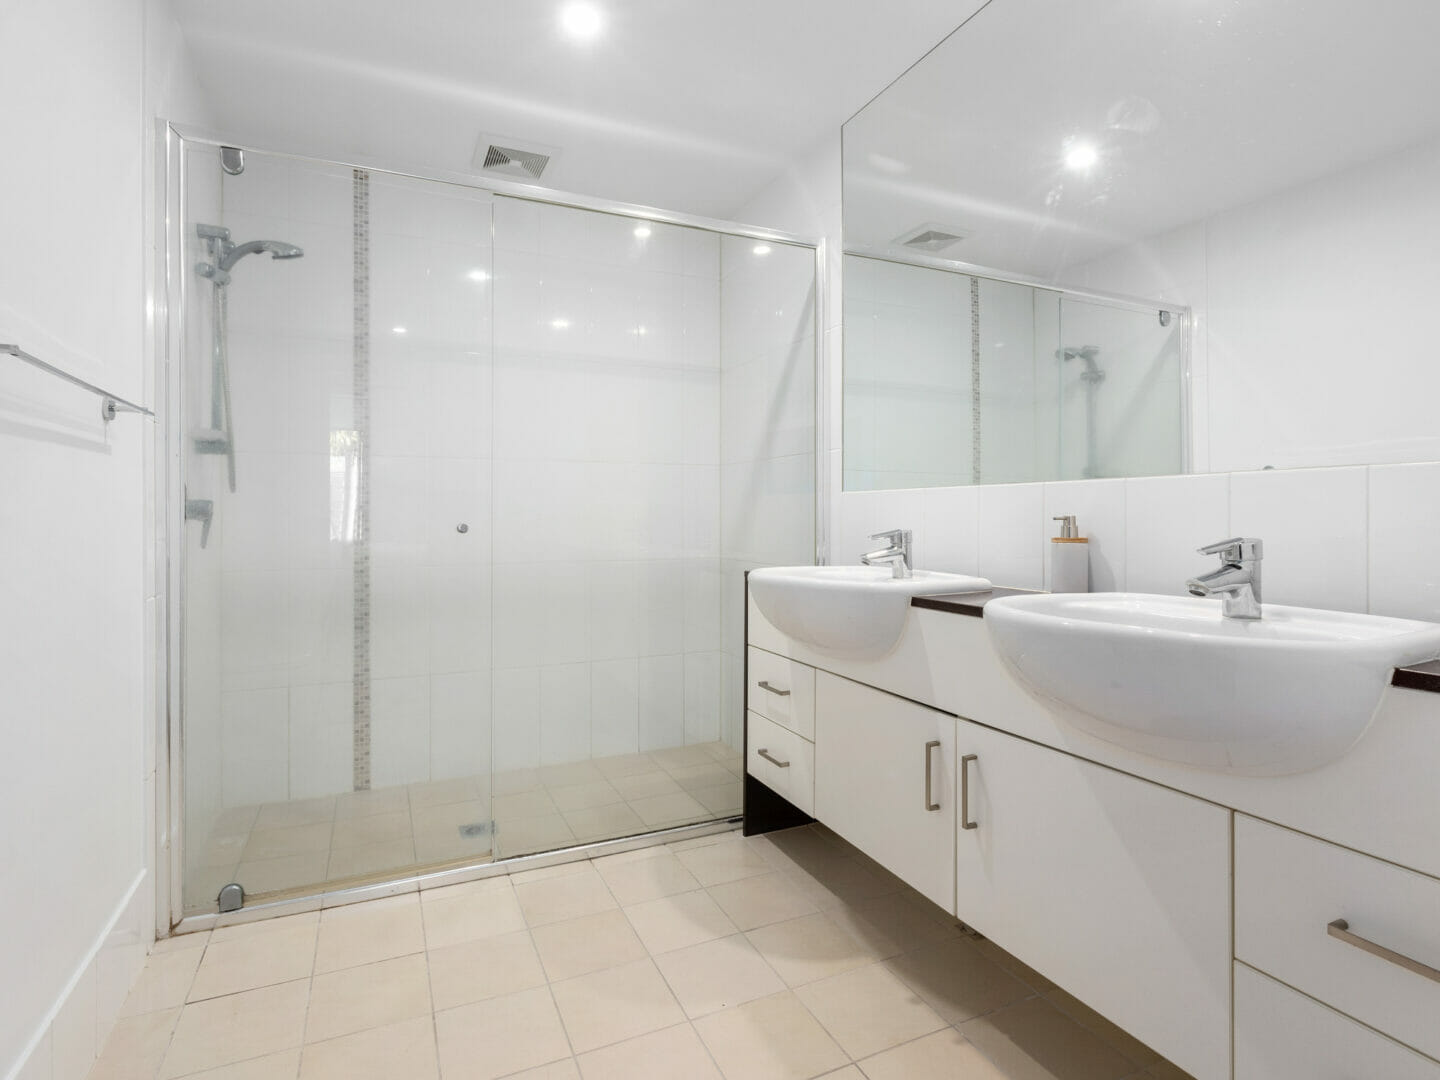 Bathroom vanity with double basins next to a glass shower enclosure